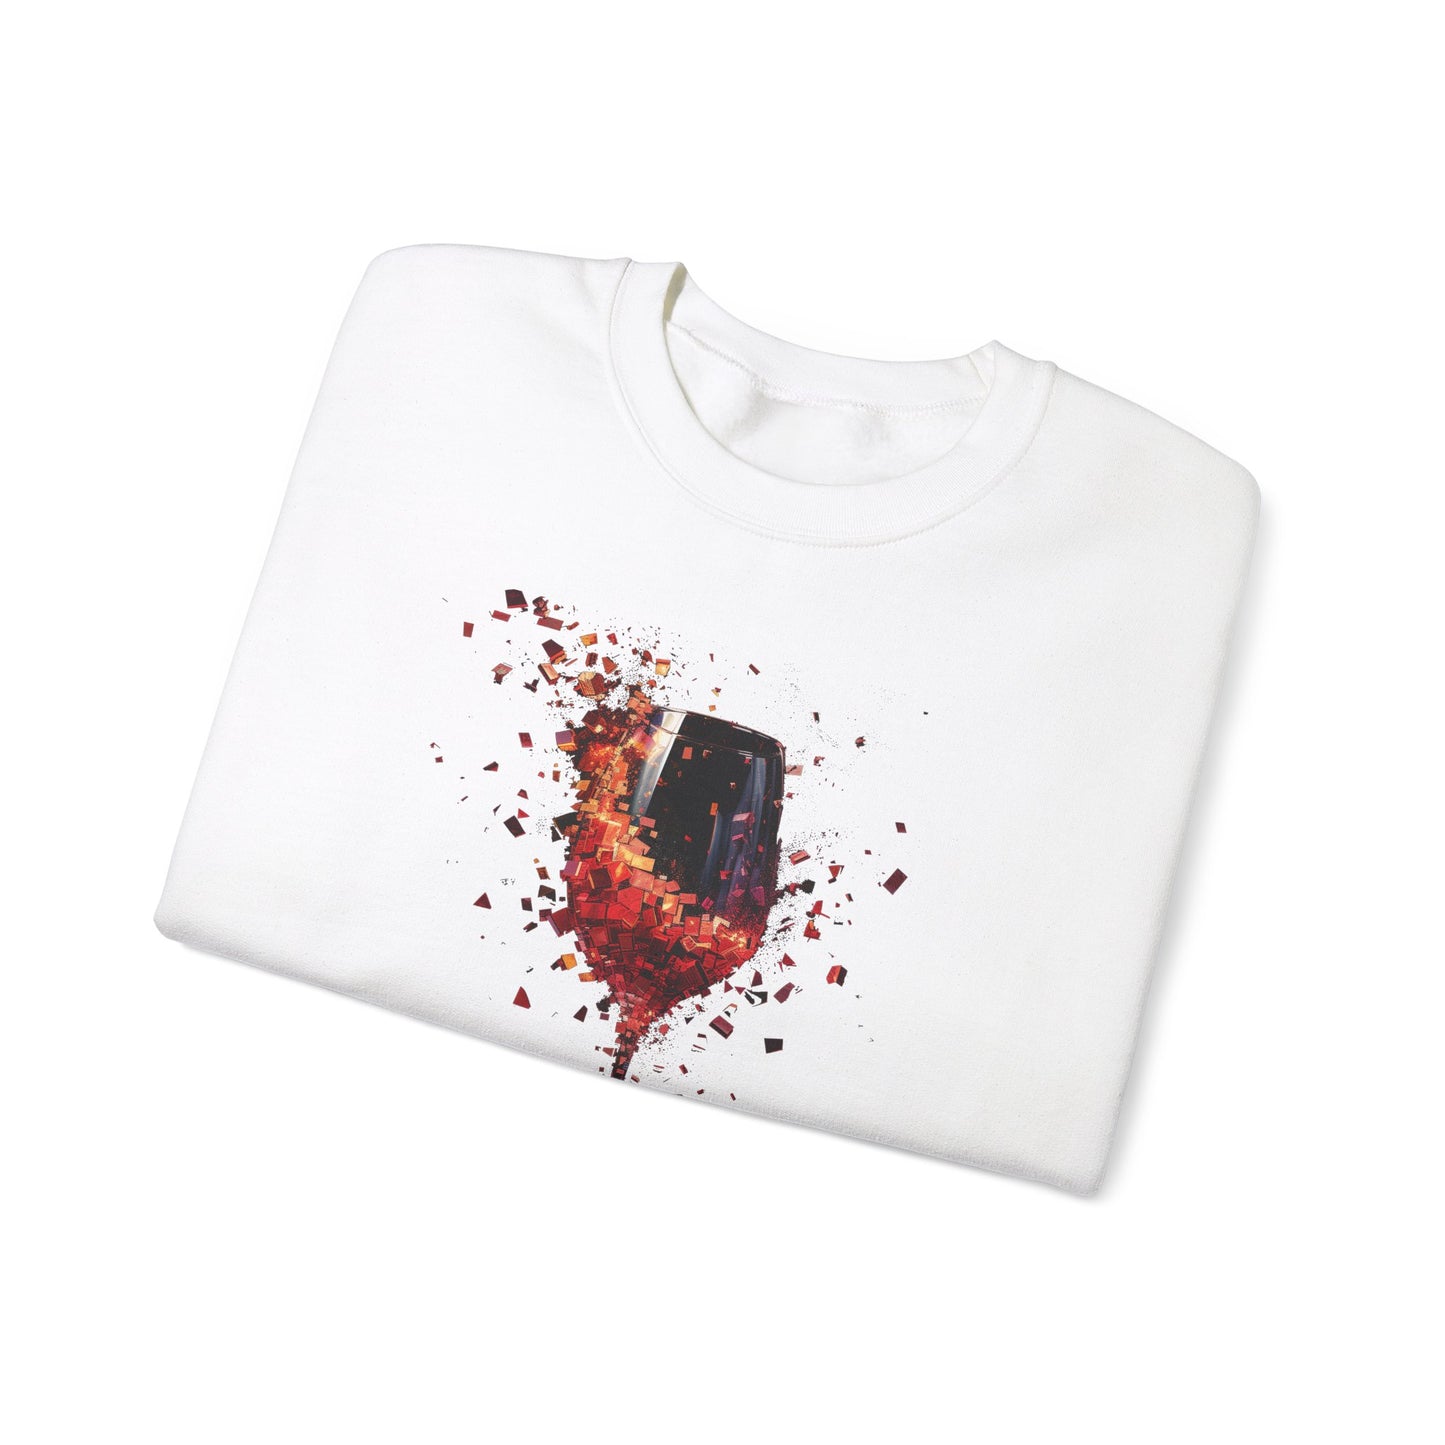 Wine'd It Up, Wine Unisex Heavy Blend Crewneck Sweatshirt Artistic AI Made Cool Artsy Design Dark Style Edgy wineo glass lovers red white